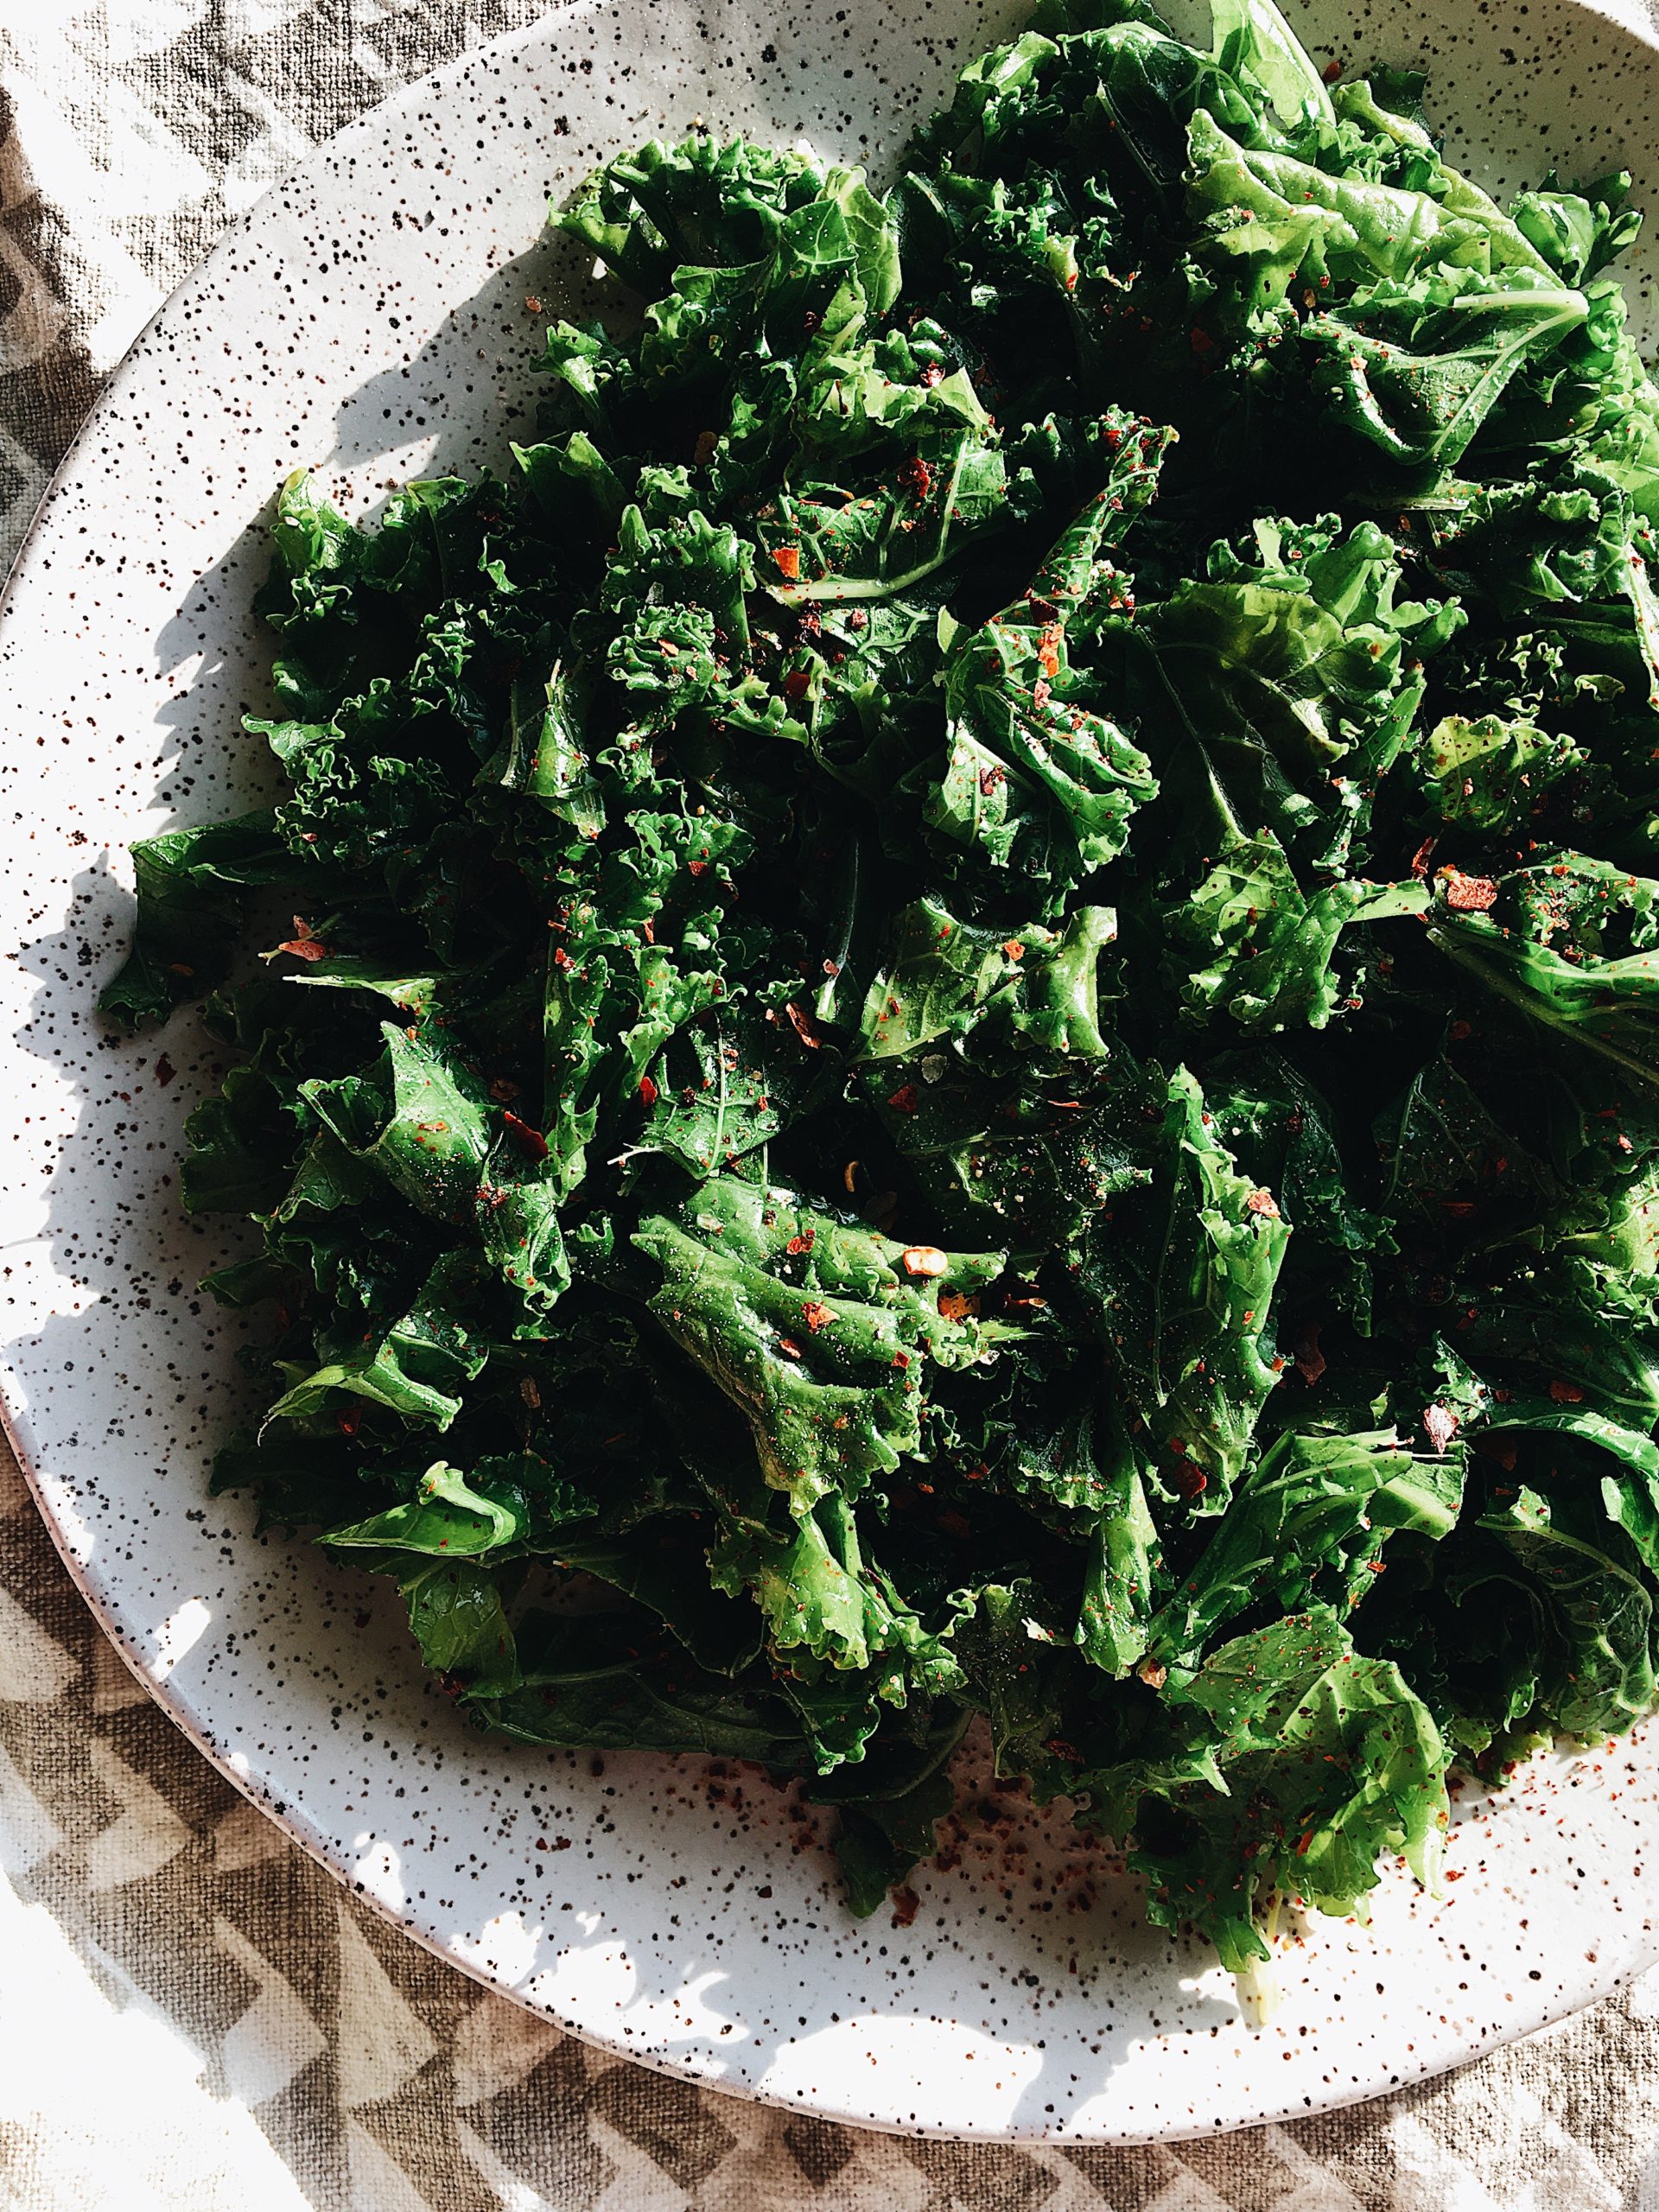 A close up view of braised kale with seasonings.